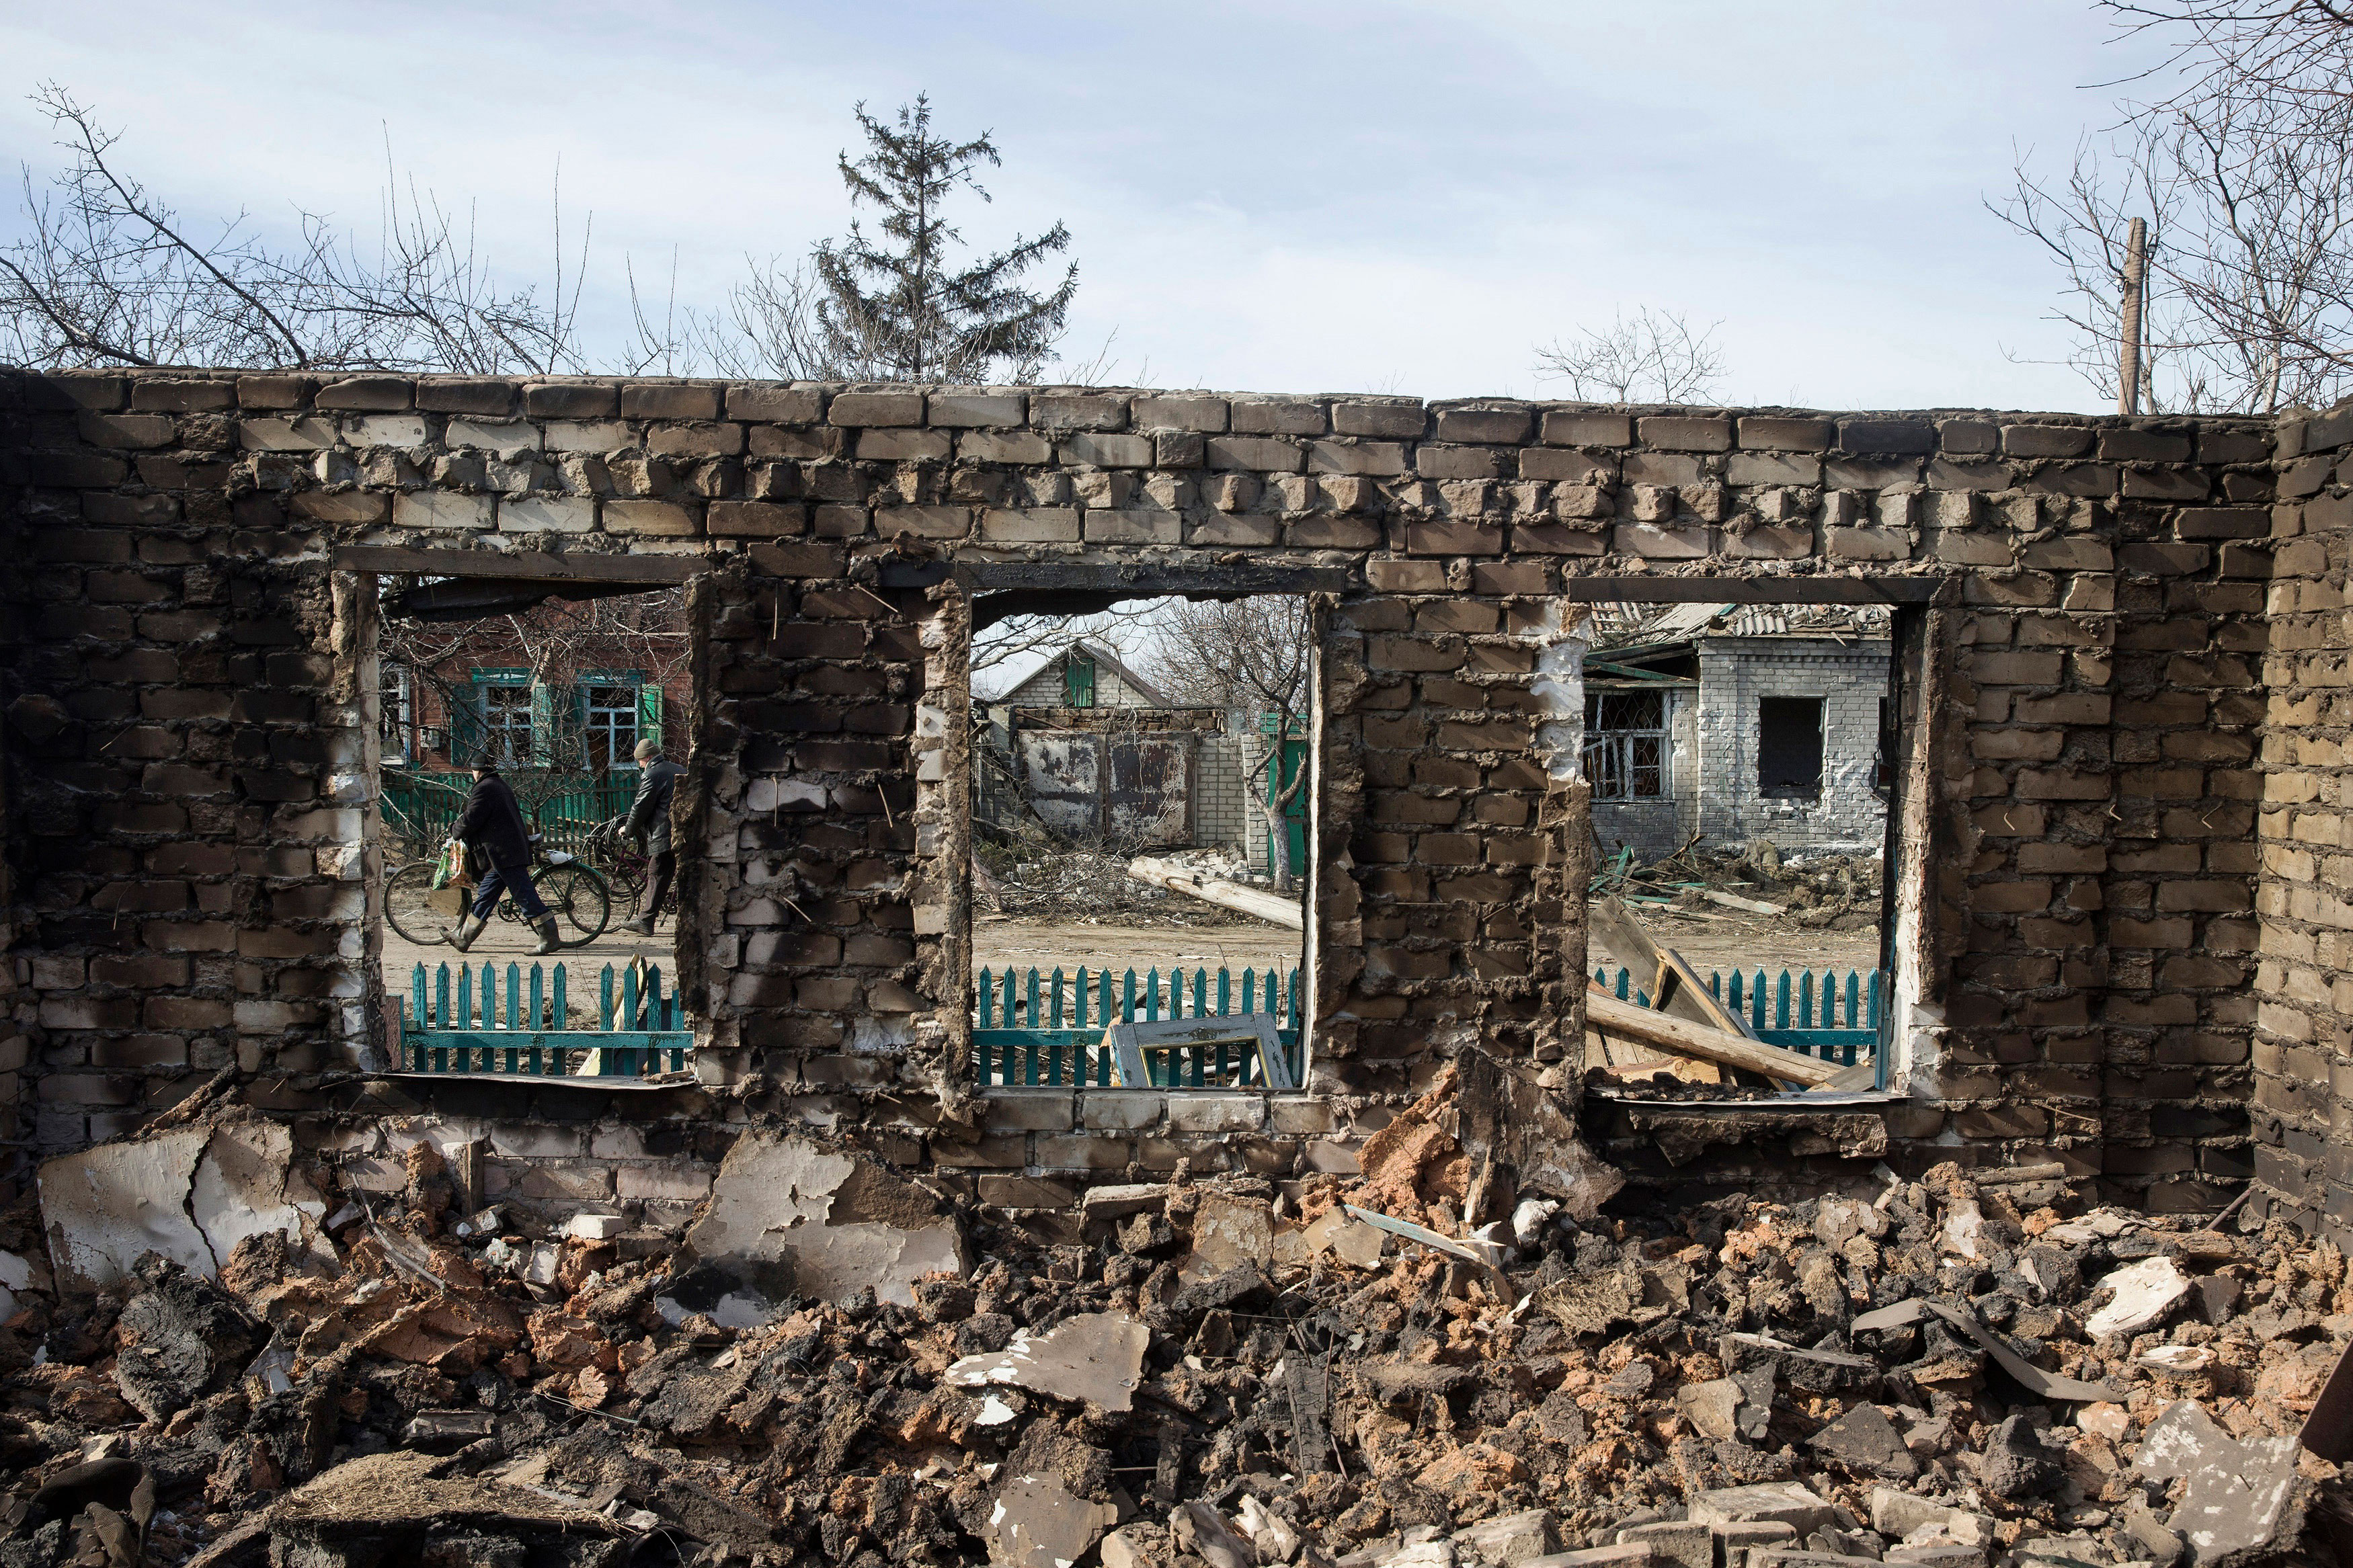 A house damaged by fighting in the town of Debaltseve, Ukraine, Feb. 25, 2015. (Photo: Baz Ratner/Reuters/Newscom)